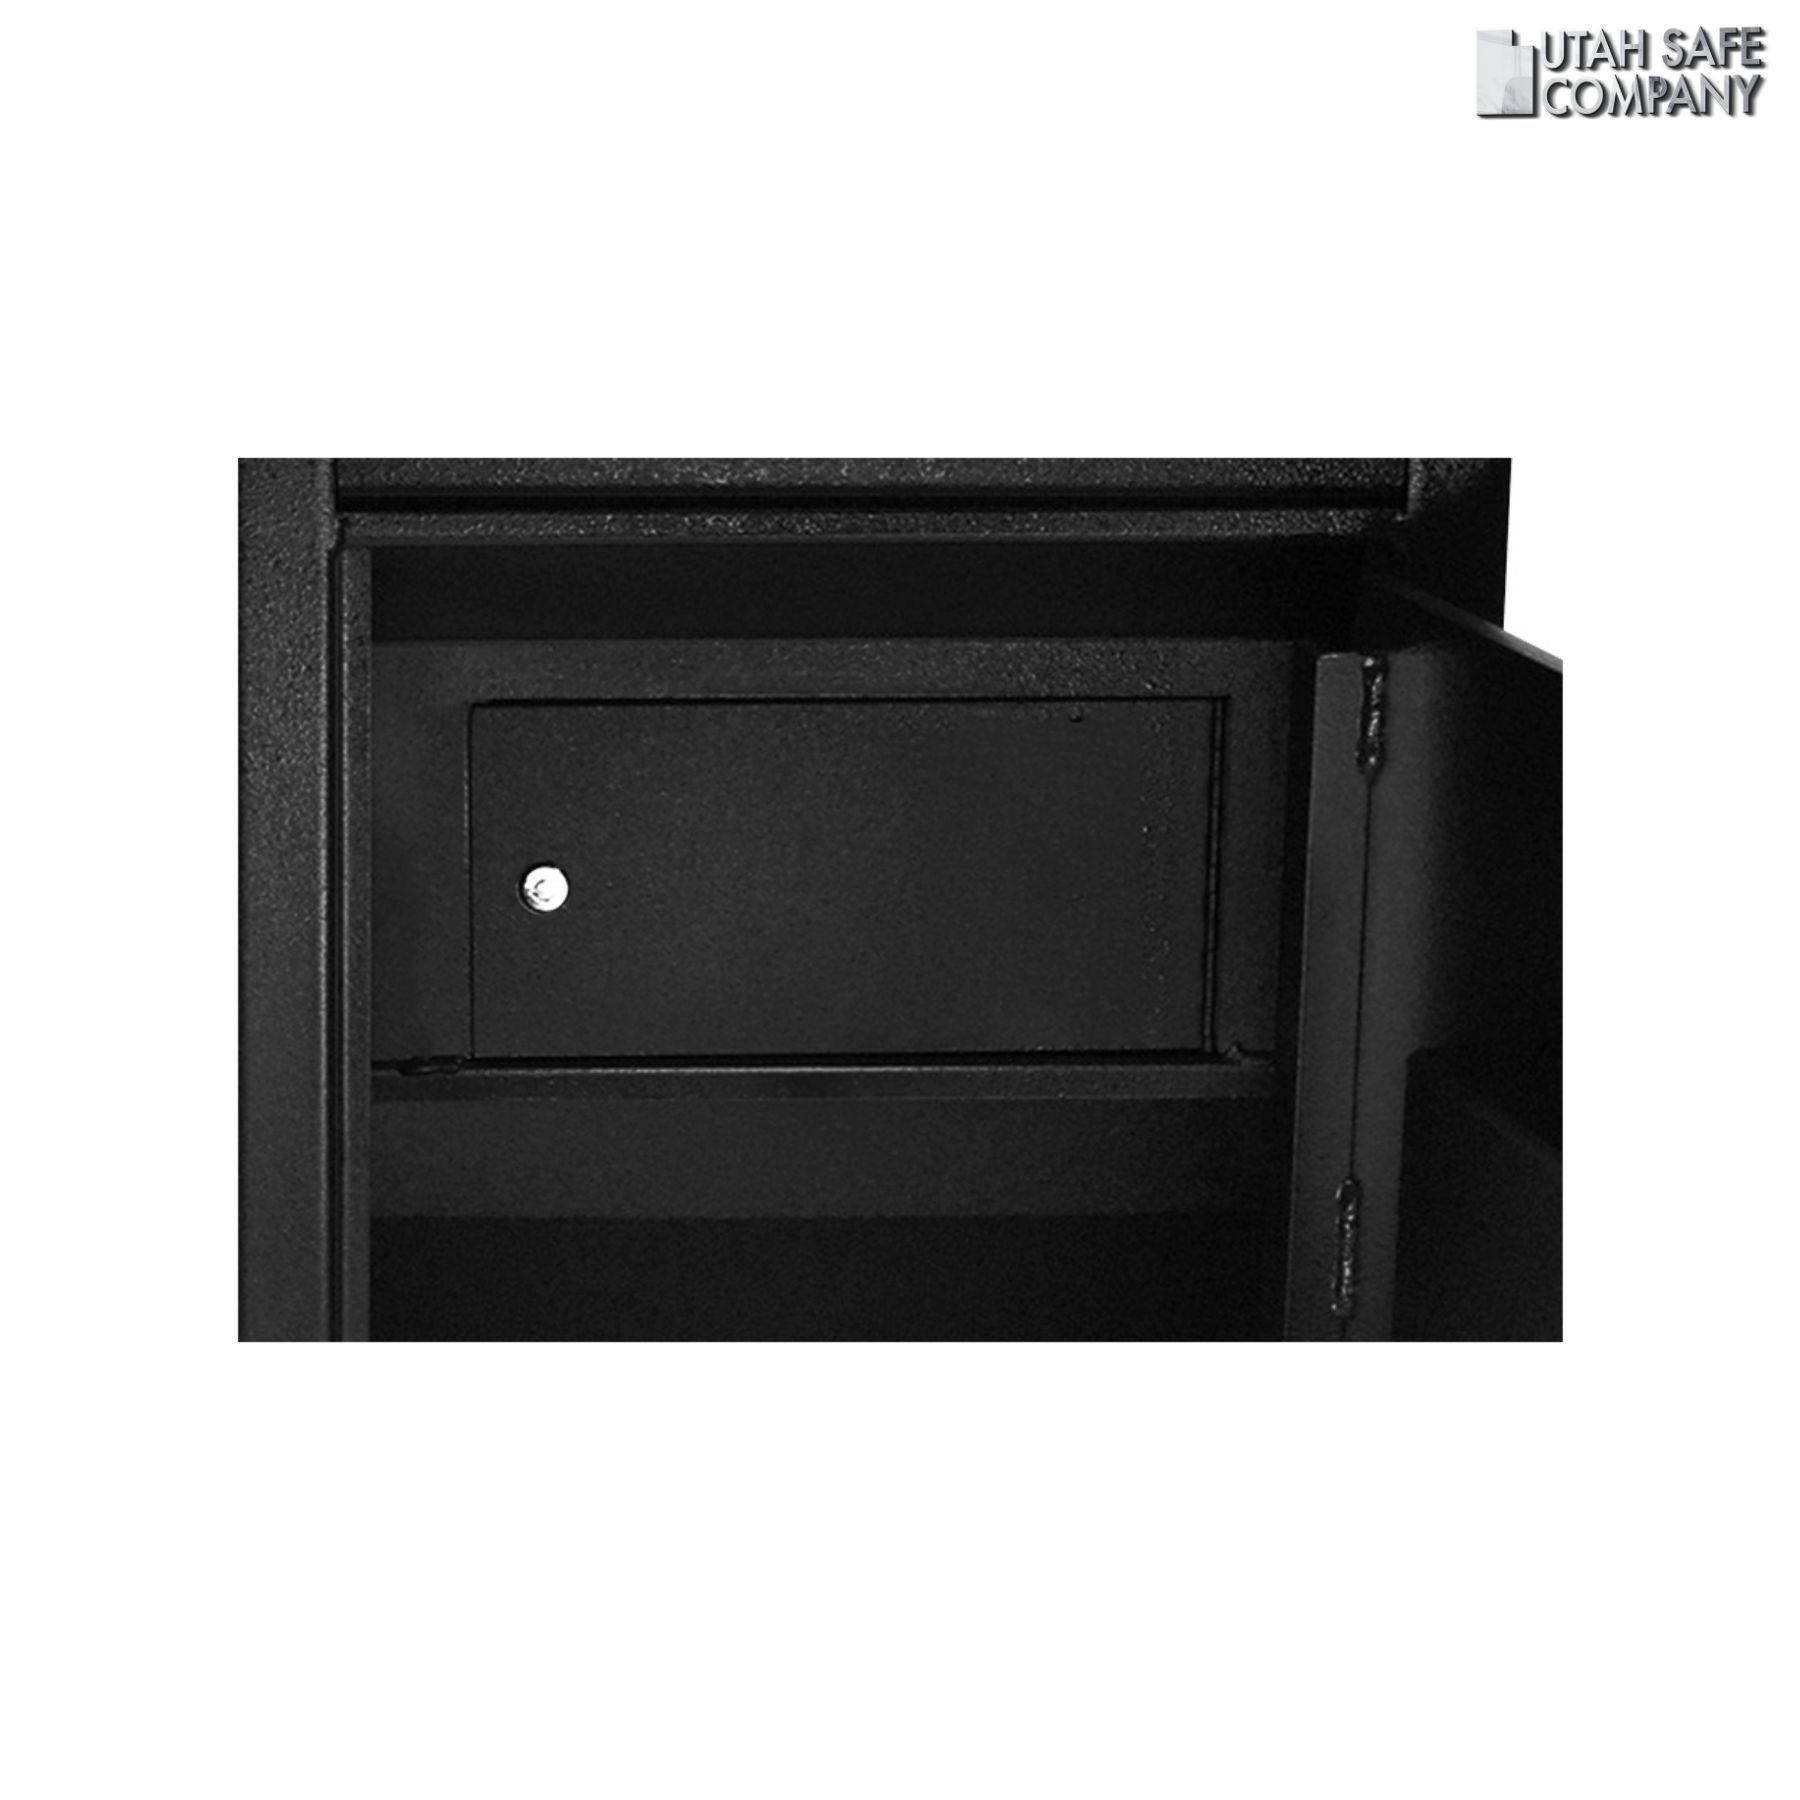 Stealth DS5020FL10 Heavy Duty Depository Safe